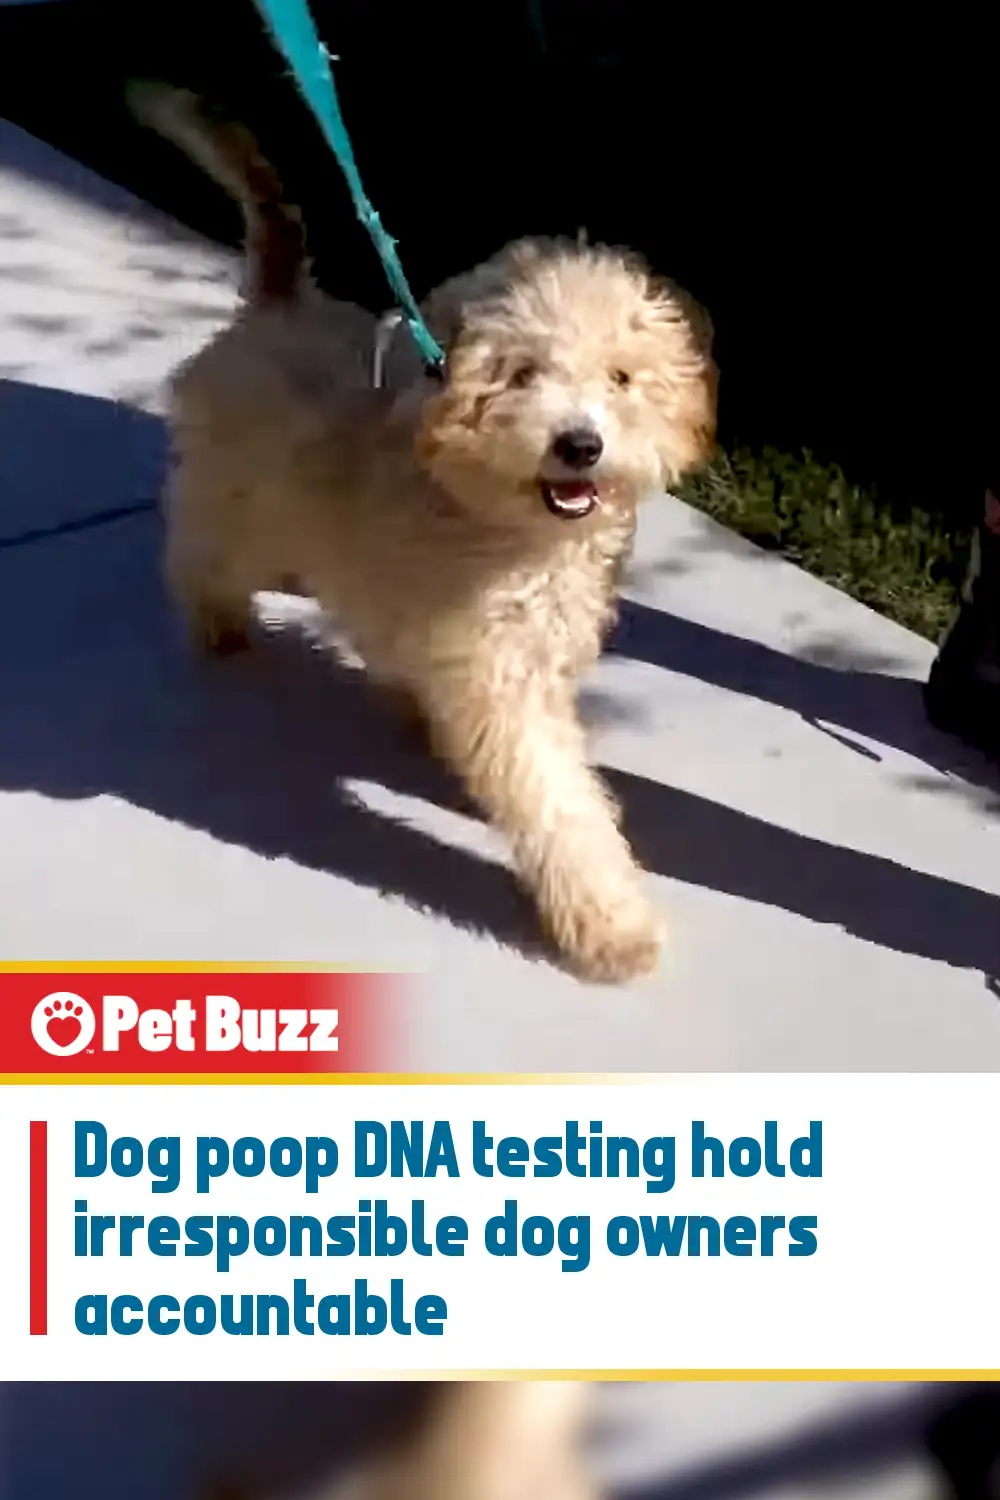 Dog poop DNA testing hold irresponsible dog owners accountable